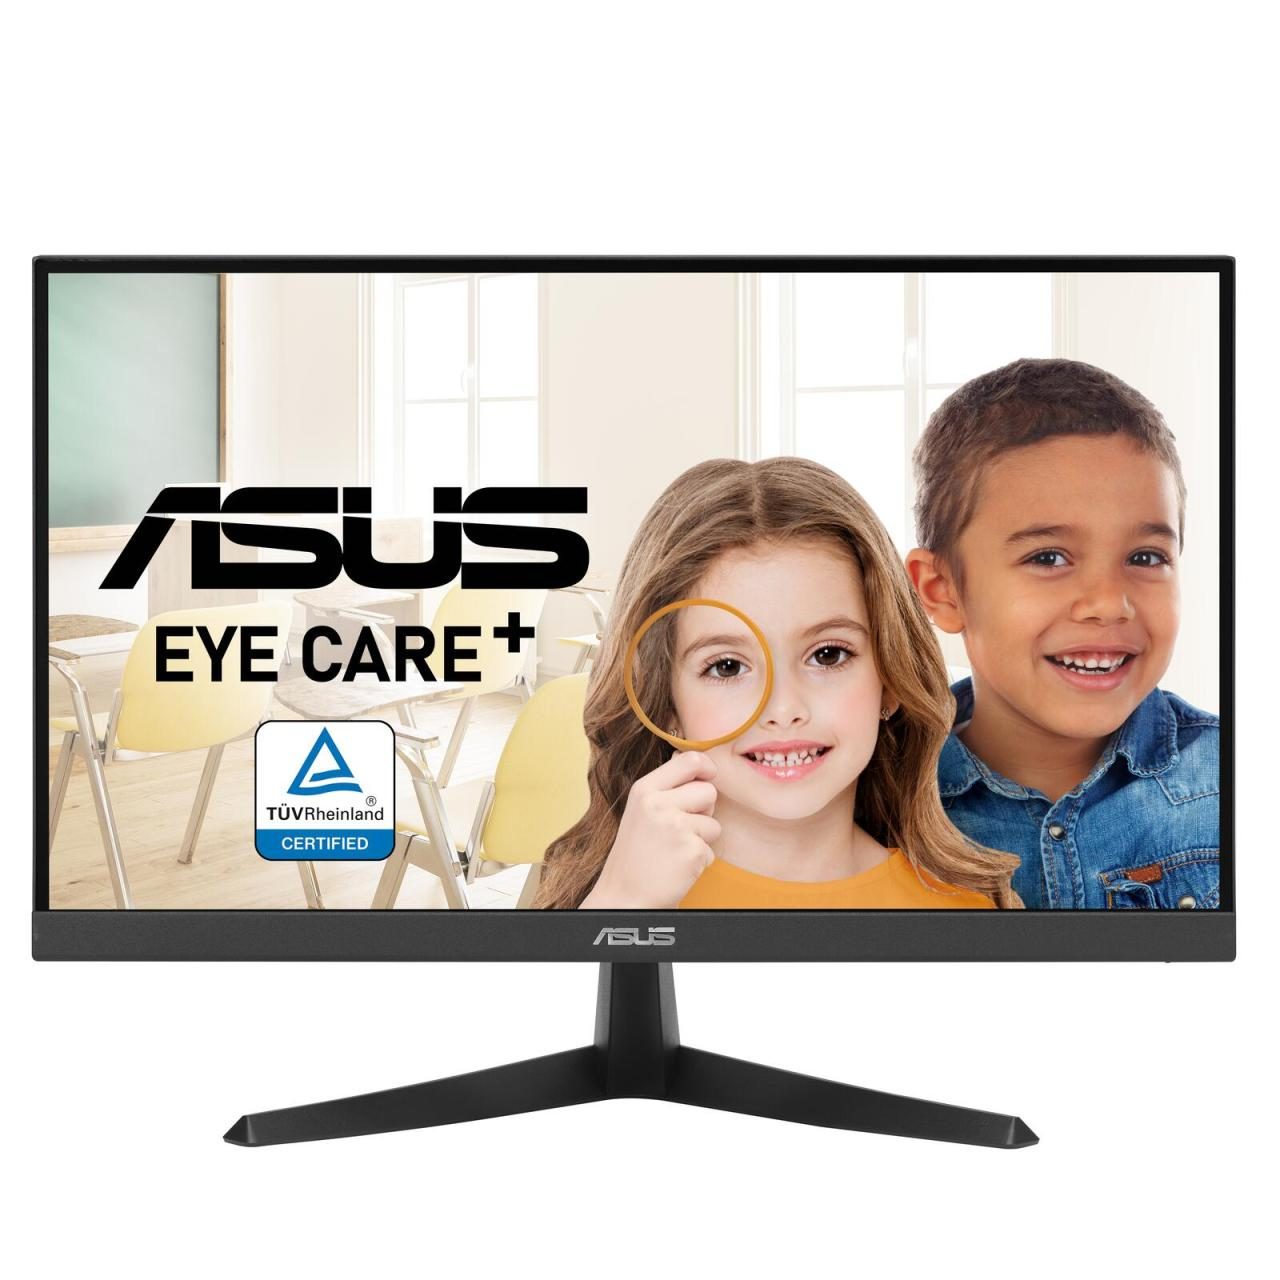 ASUS VY229Q Eye Care Monitor 54,5 cm (21,4 Zoll) von ASUS